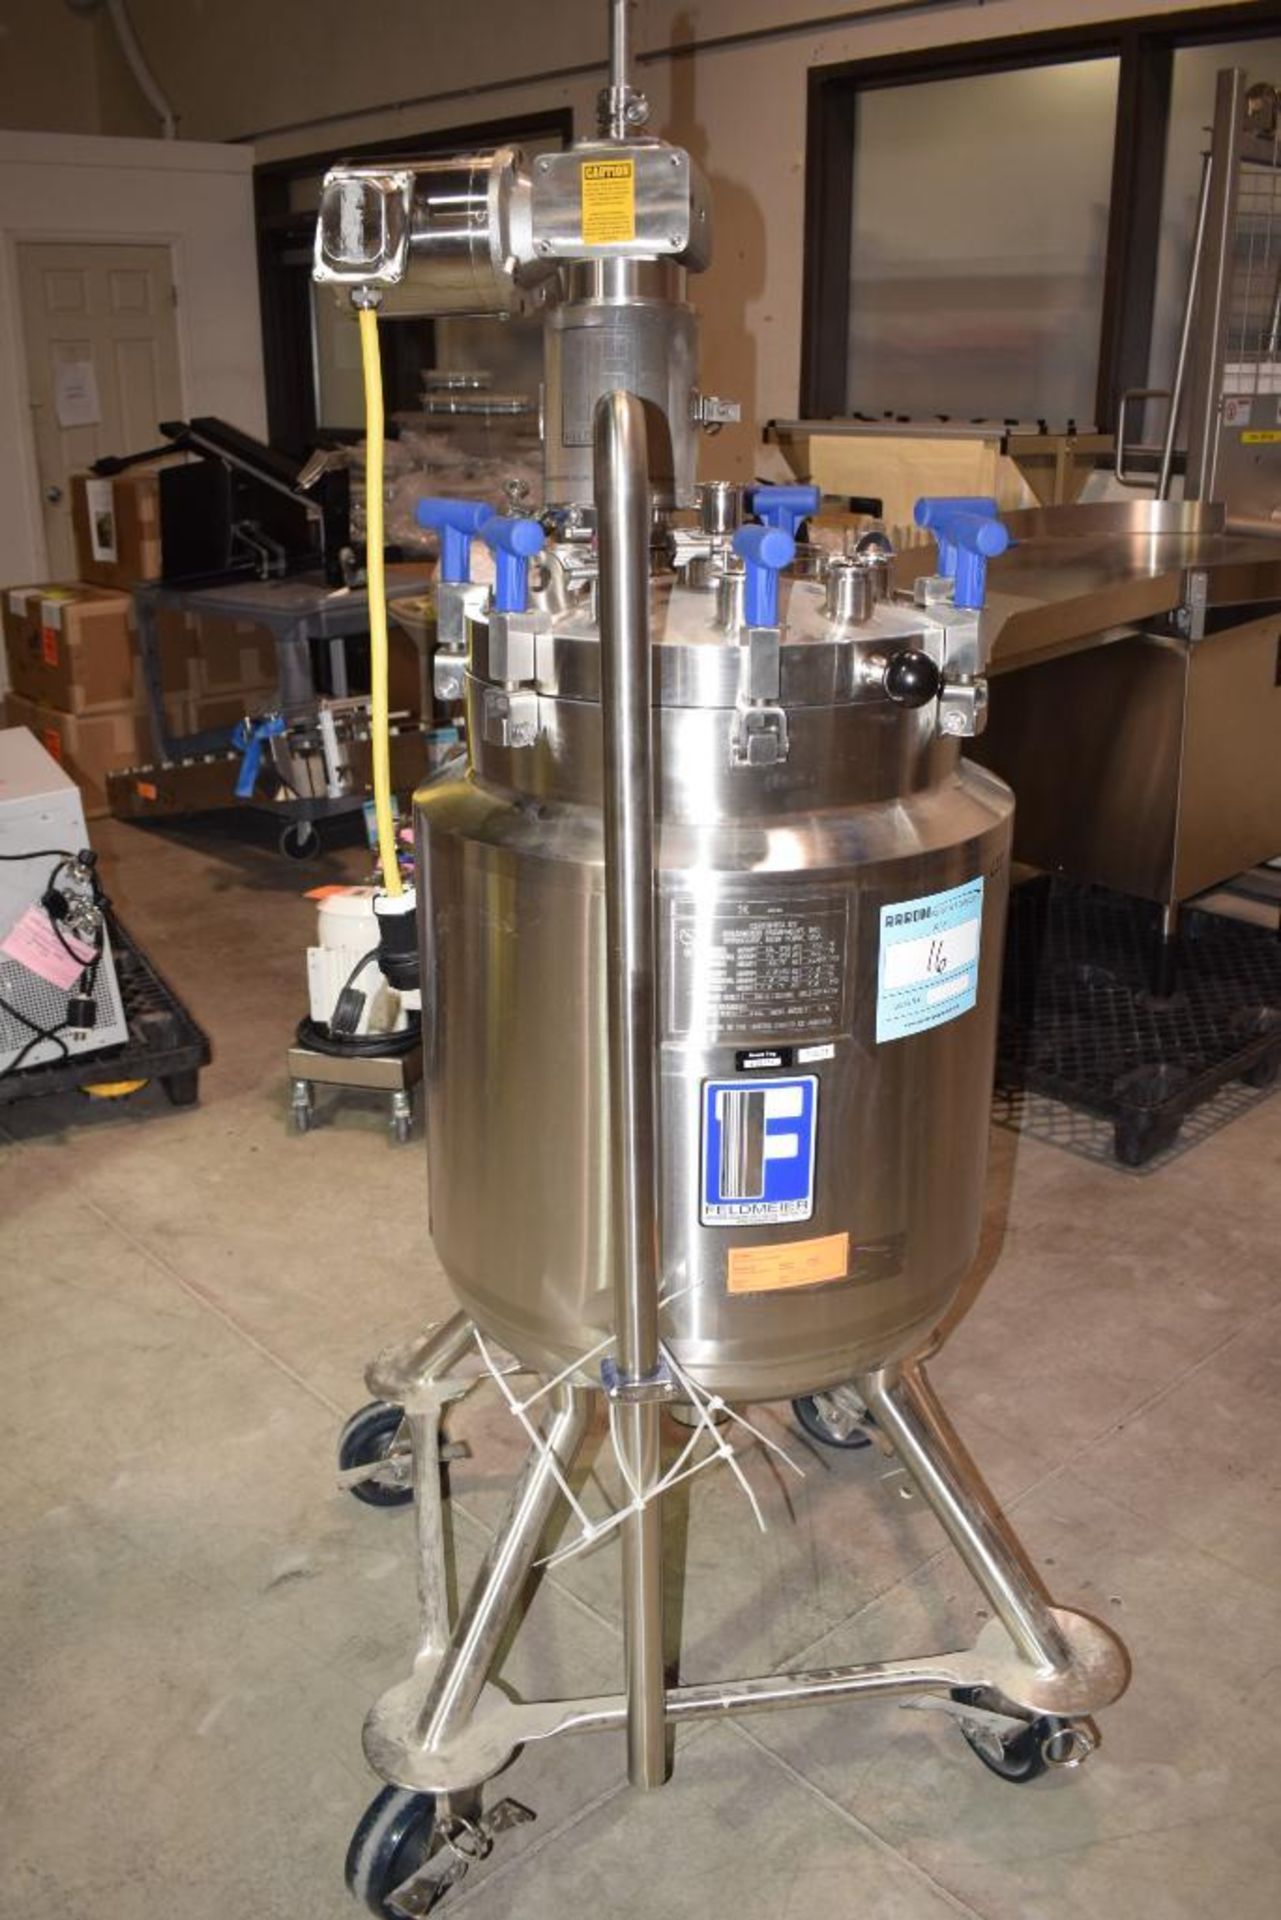 Feldmeier Pressure Tank, Approximate 80 Liter (21 Gallon), 316L Stainless Steel. Approximate 18" dia